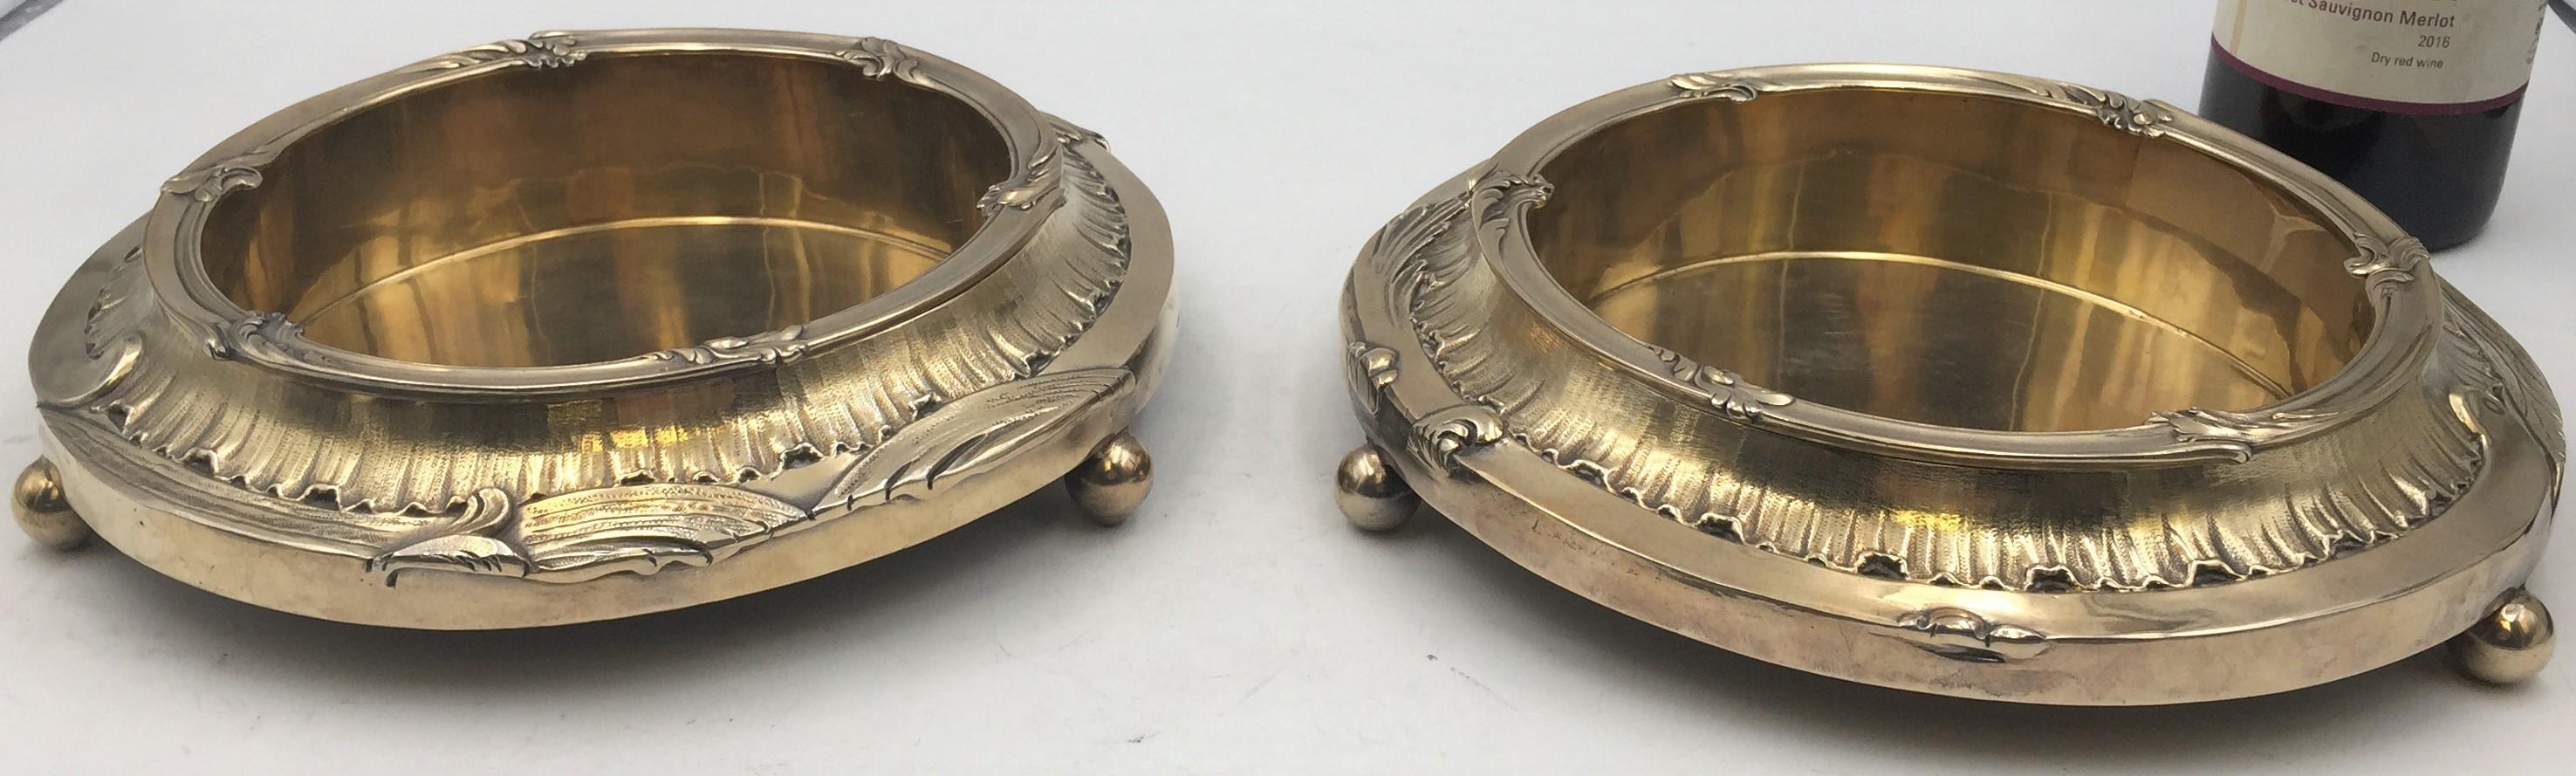 Pair of French sterling silver gilt magnum bottle coasters on stands with exquisite stylized vegetal motifs. They separate in 2 parts; the interior inserts have the French silver hallmarks, and further incised is 